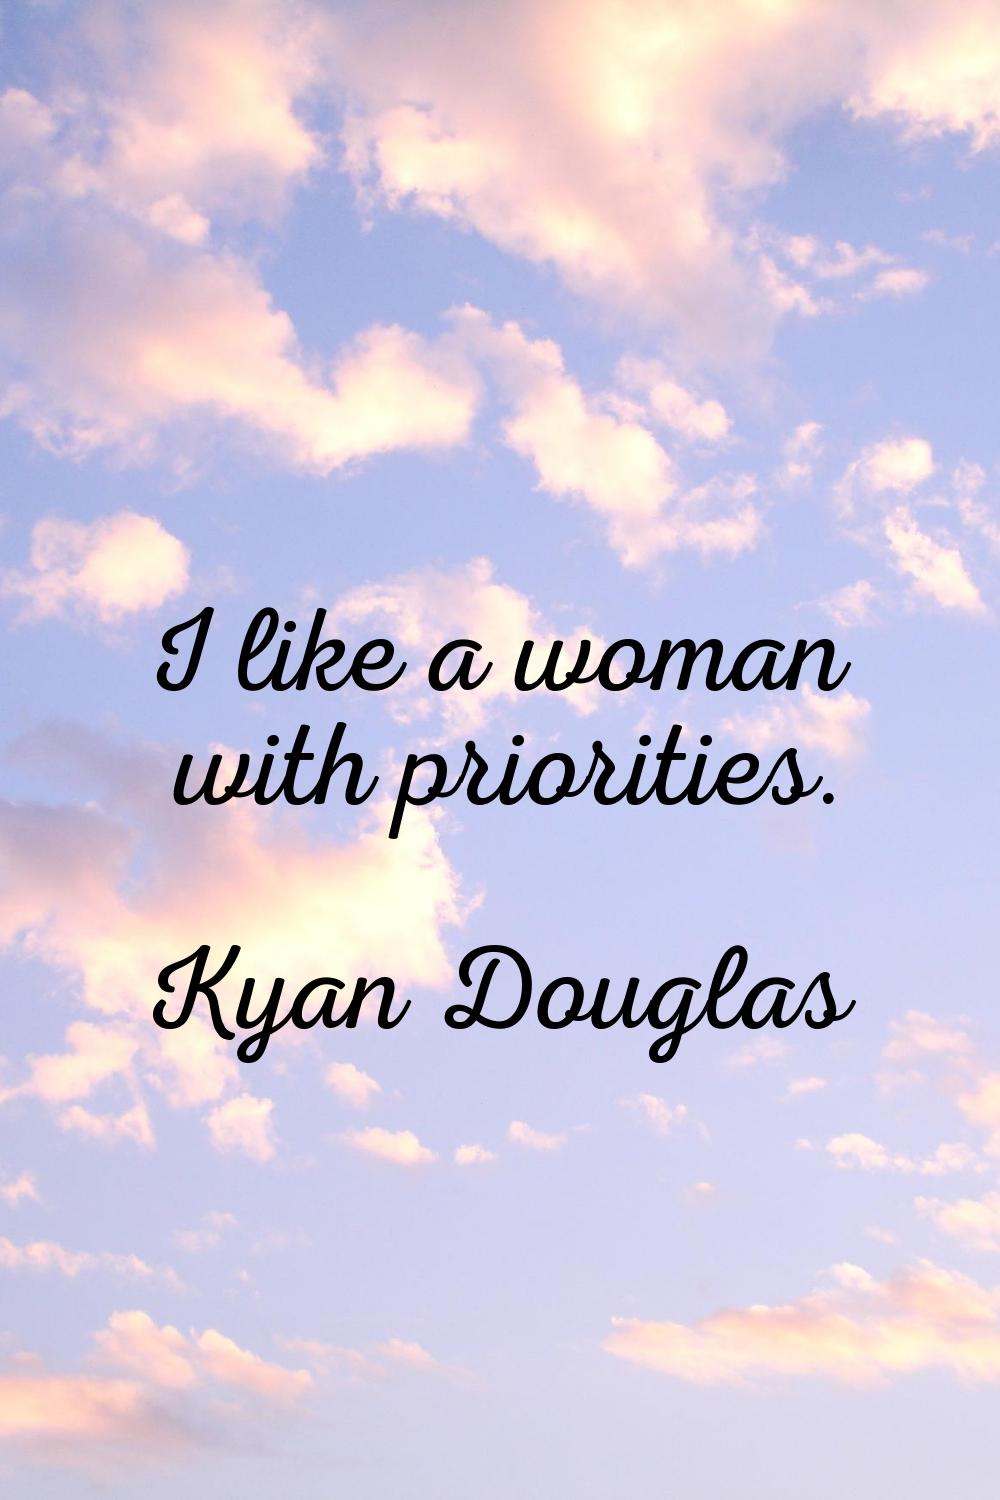 I like a woman with priorities.